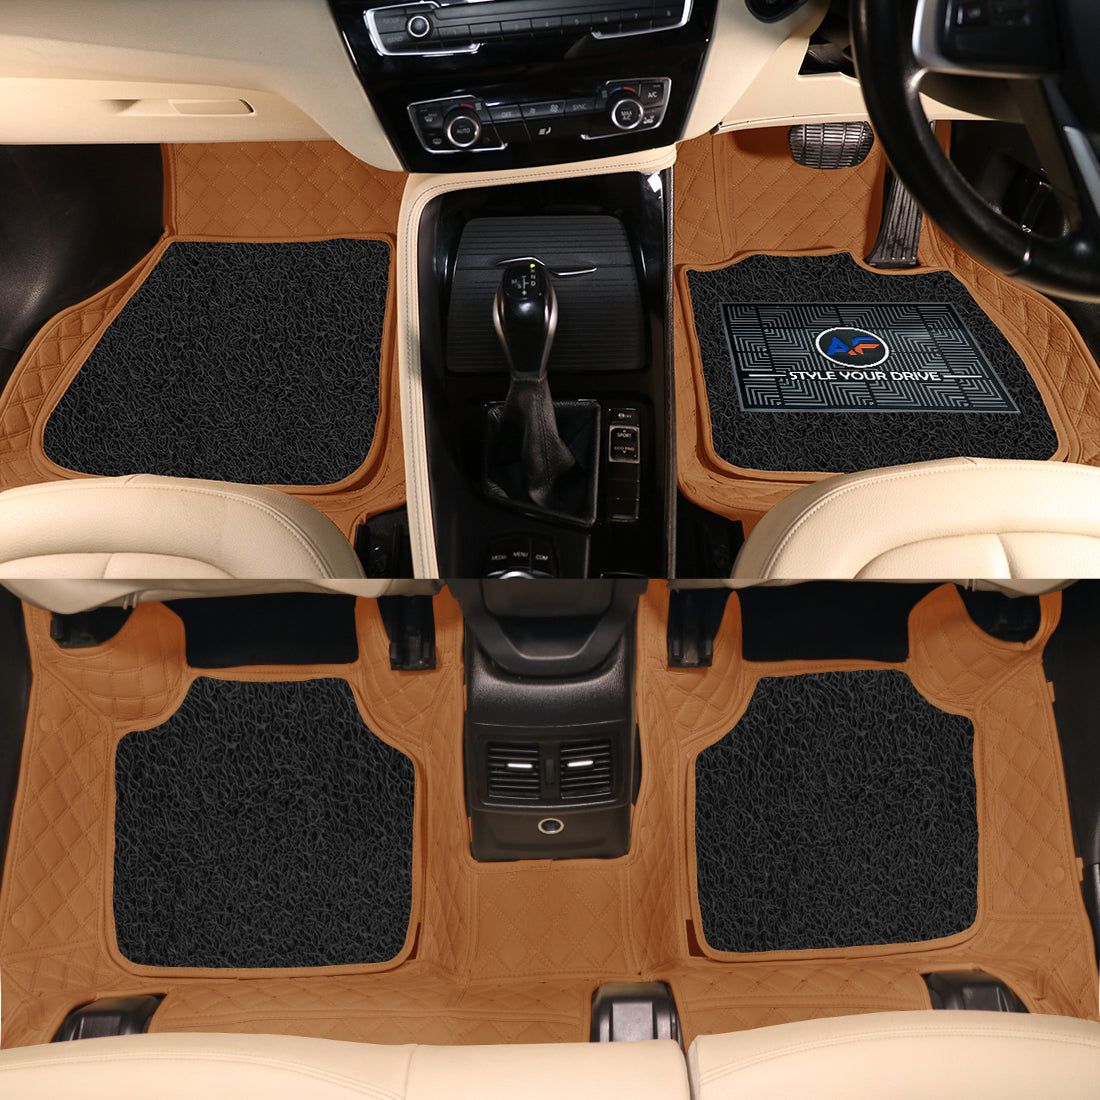 Mercedes GLS 400d 4MATIC 2021 7D Luxury Car Mat, All Weather Proof, Anti-Skid, 100% Waterproof & Odorless with Unique Diamond Fish Design (24mm Luxury PU Leather, 2 Rows)